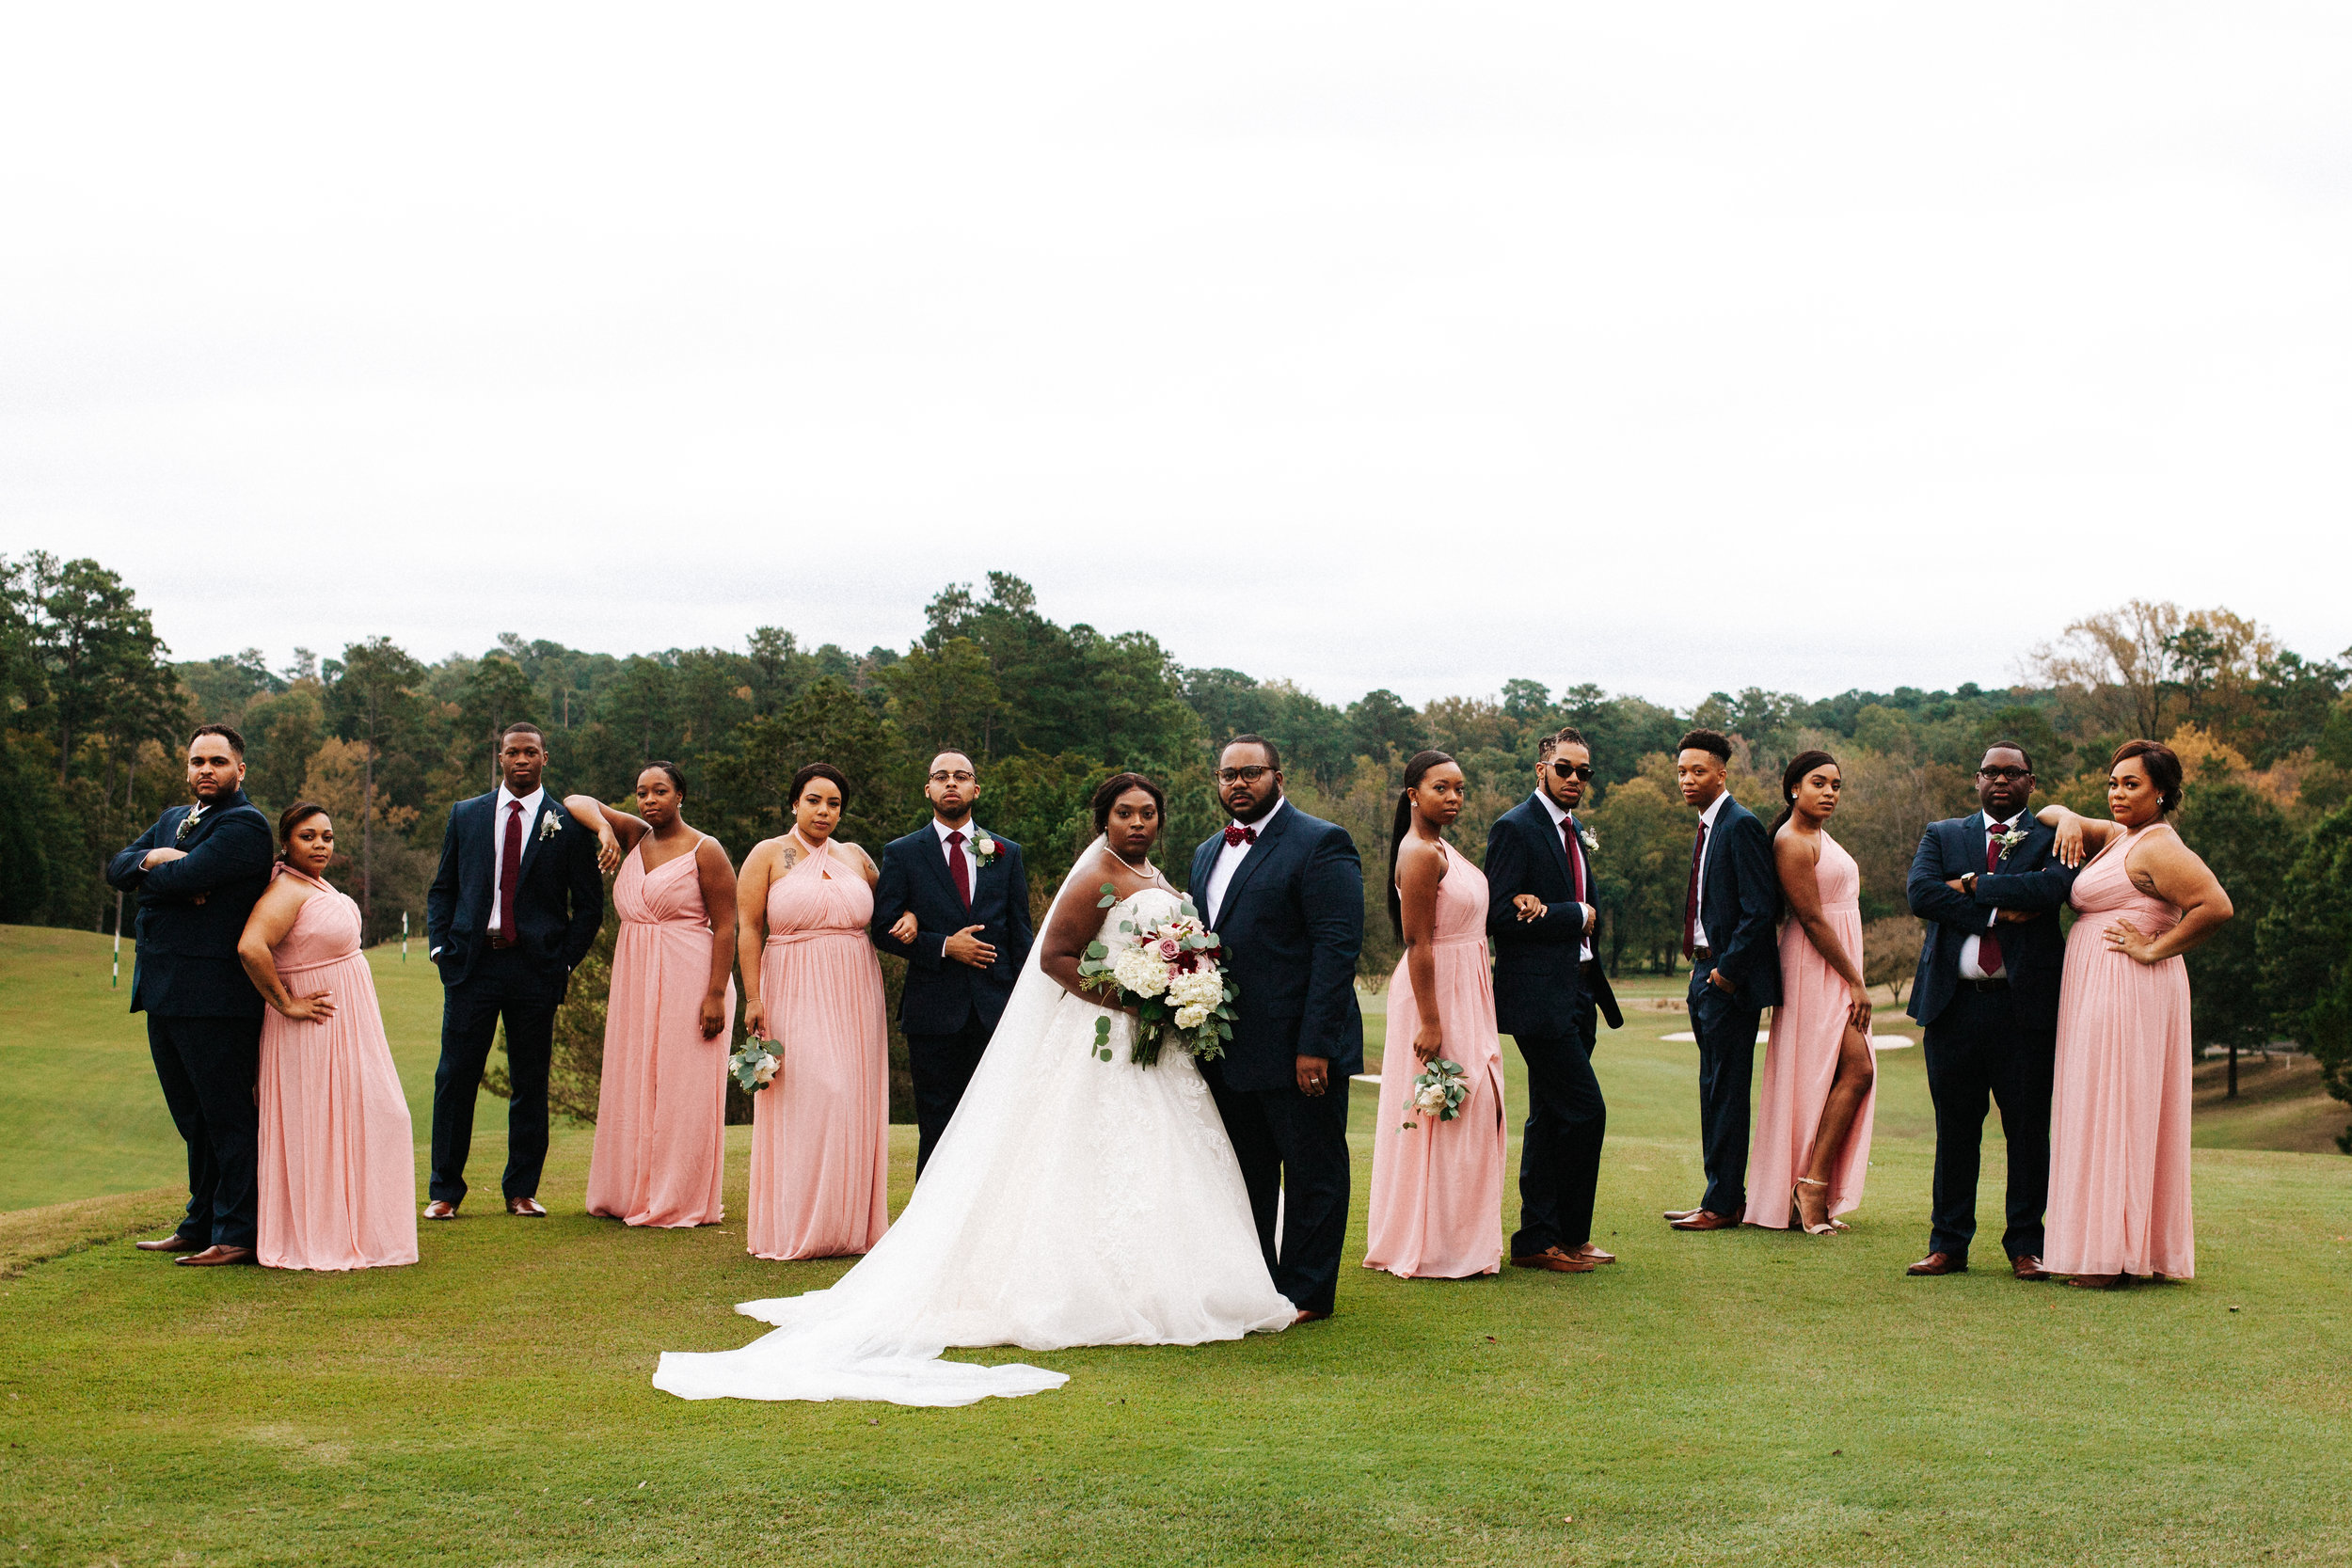  Hope Valley Country Club, Raleigh NC | Fall wedding | Bridal party photos | Marina Rey Photography 